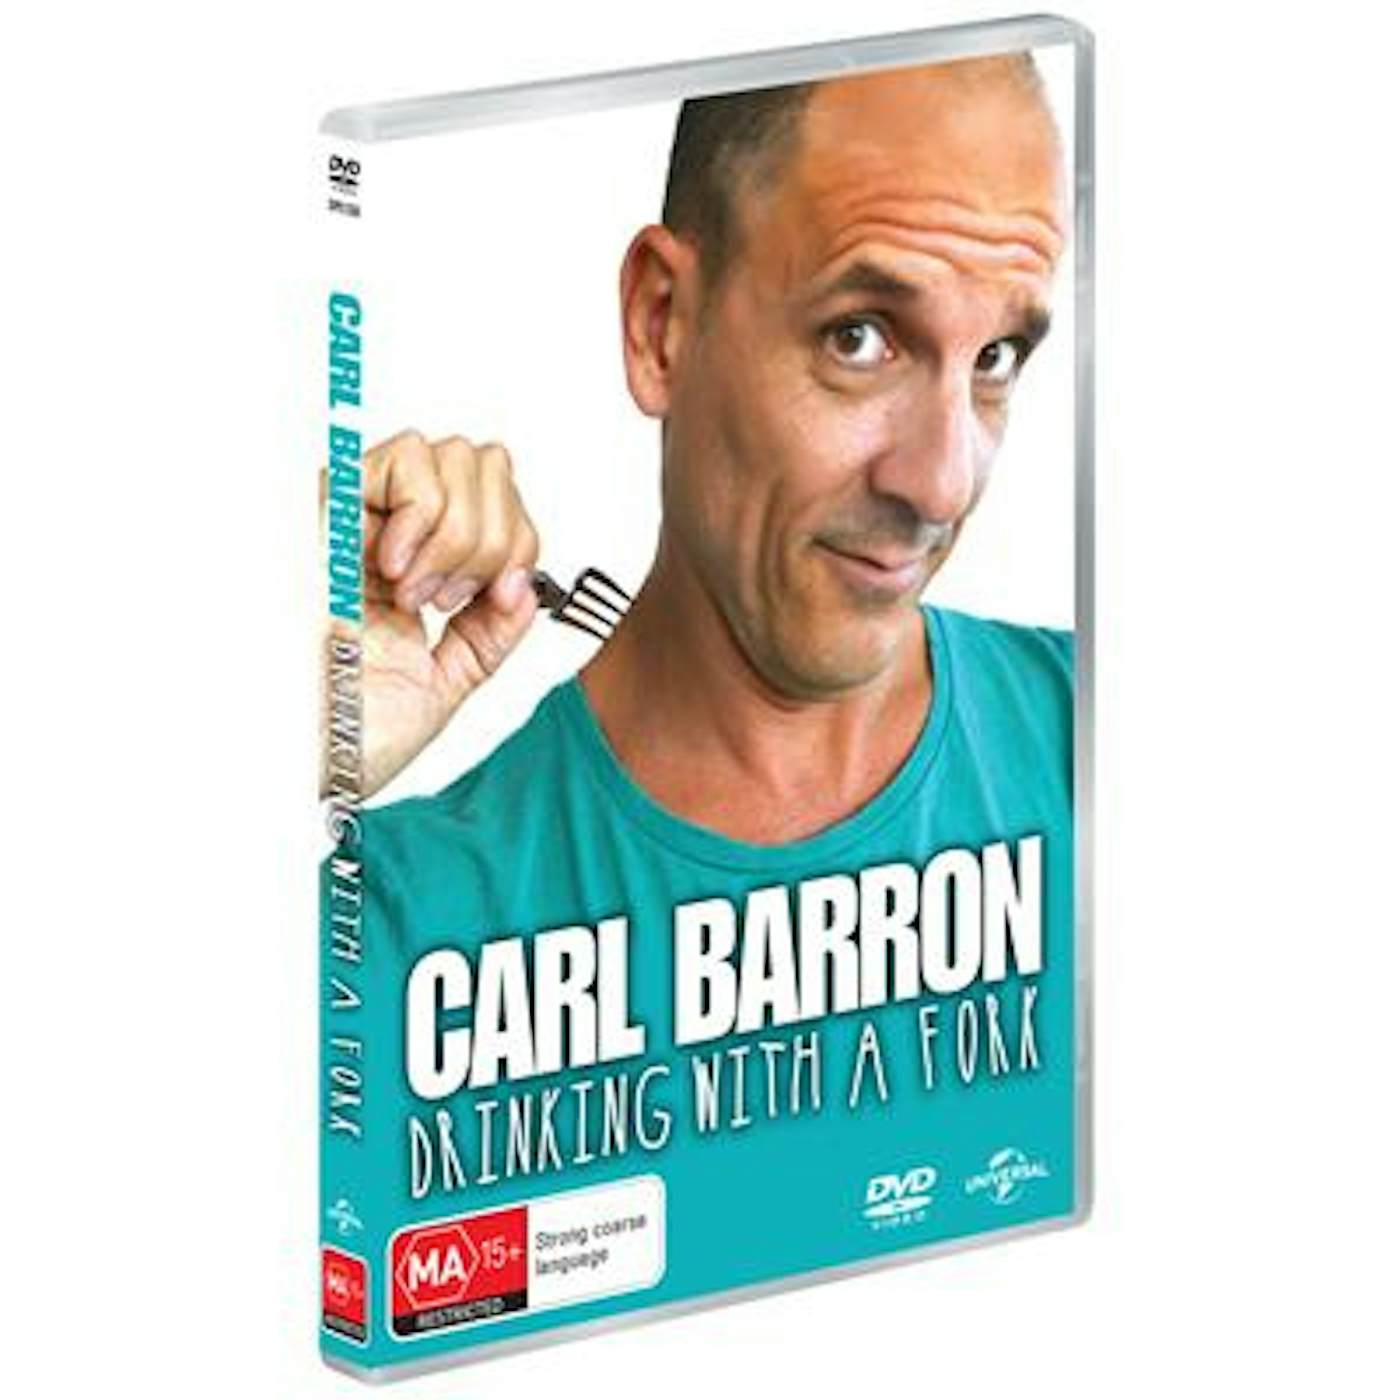 Carl Barron - Drinking with a Fork